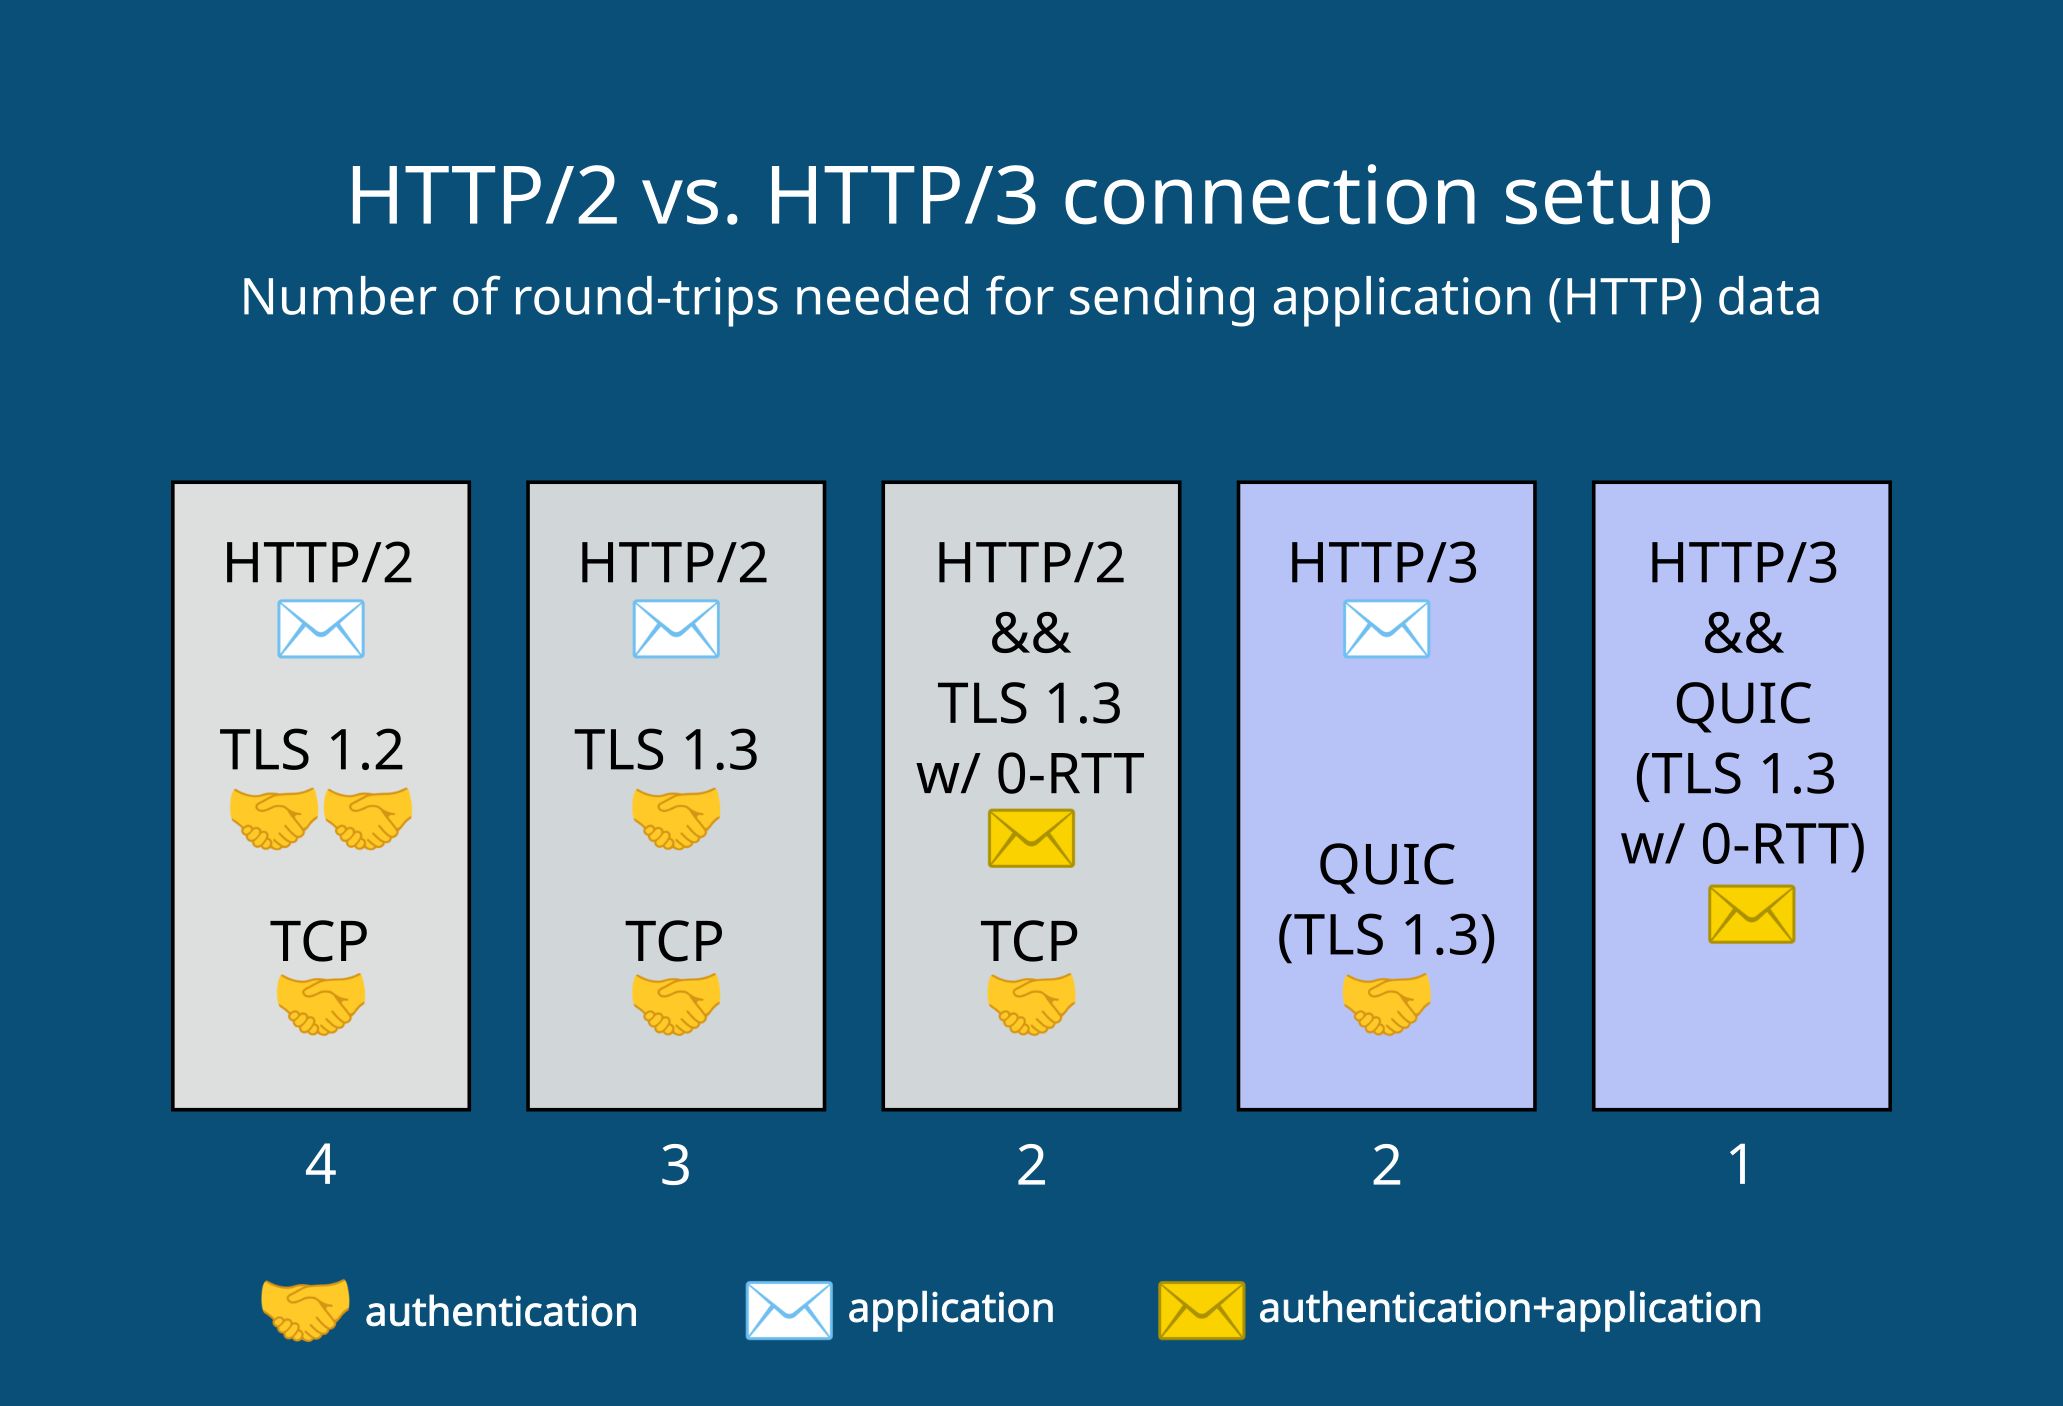 Connection setup in the HTTP/2 vs HTTP/3 stacks